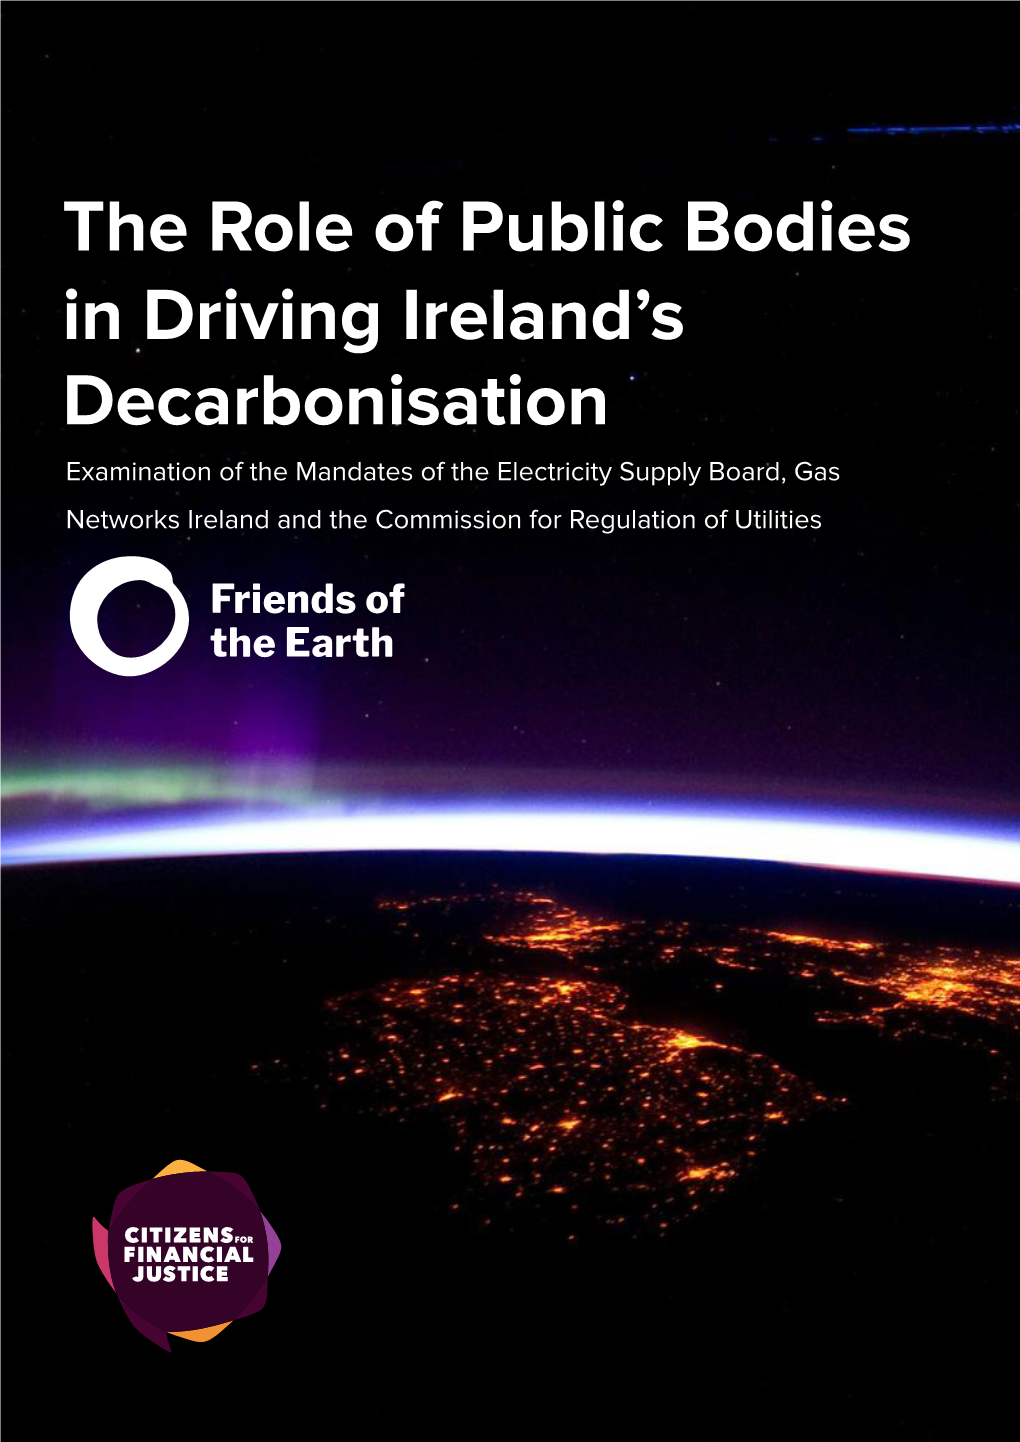 The Role of Public Bodies in Driving Ireland's Decarbonisation